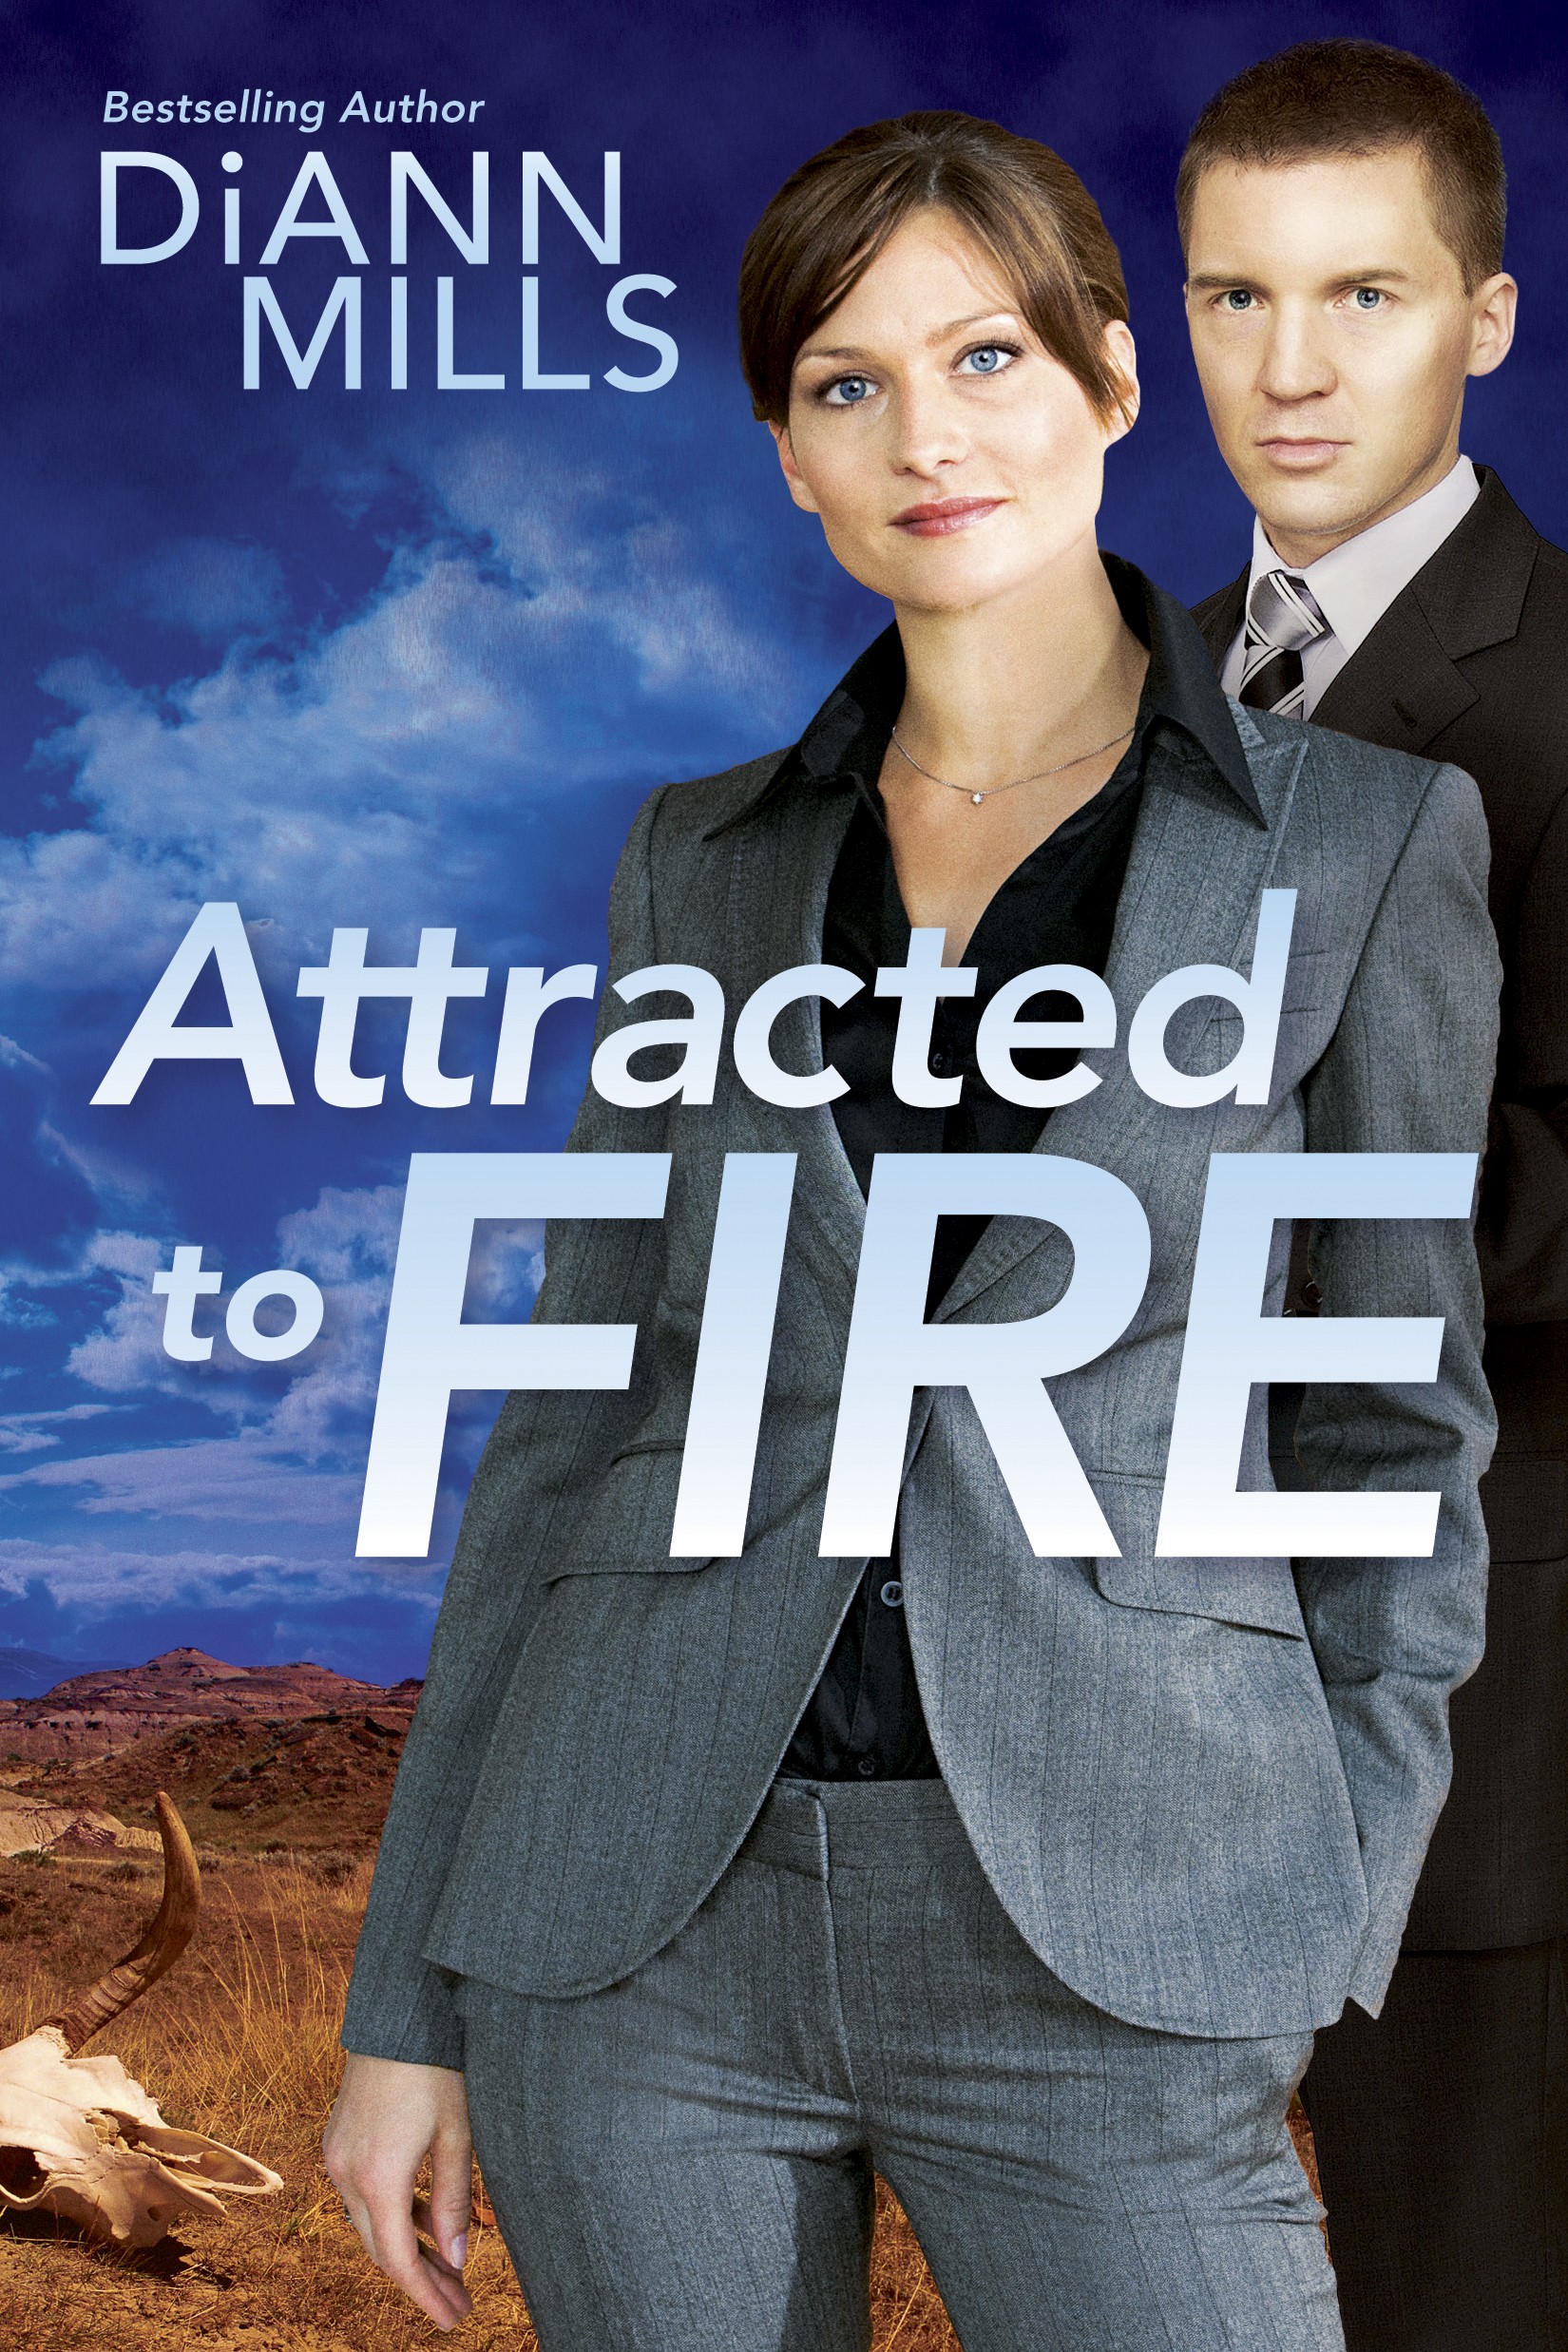 Attracted to Fire - 9781414365503 - Mills, DiAnn